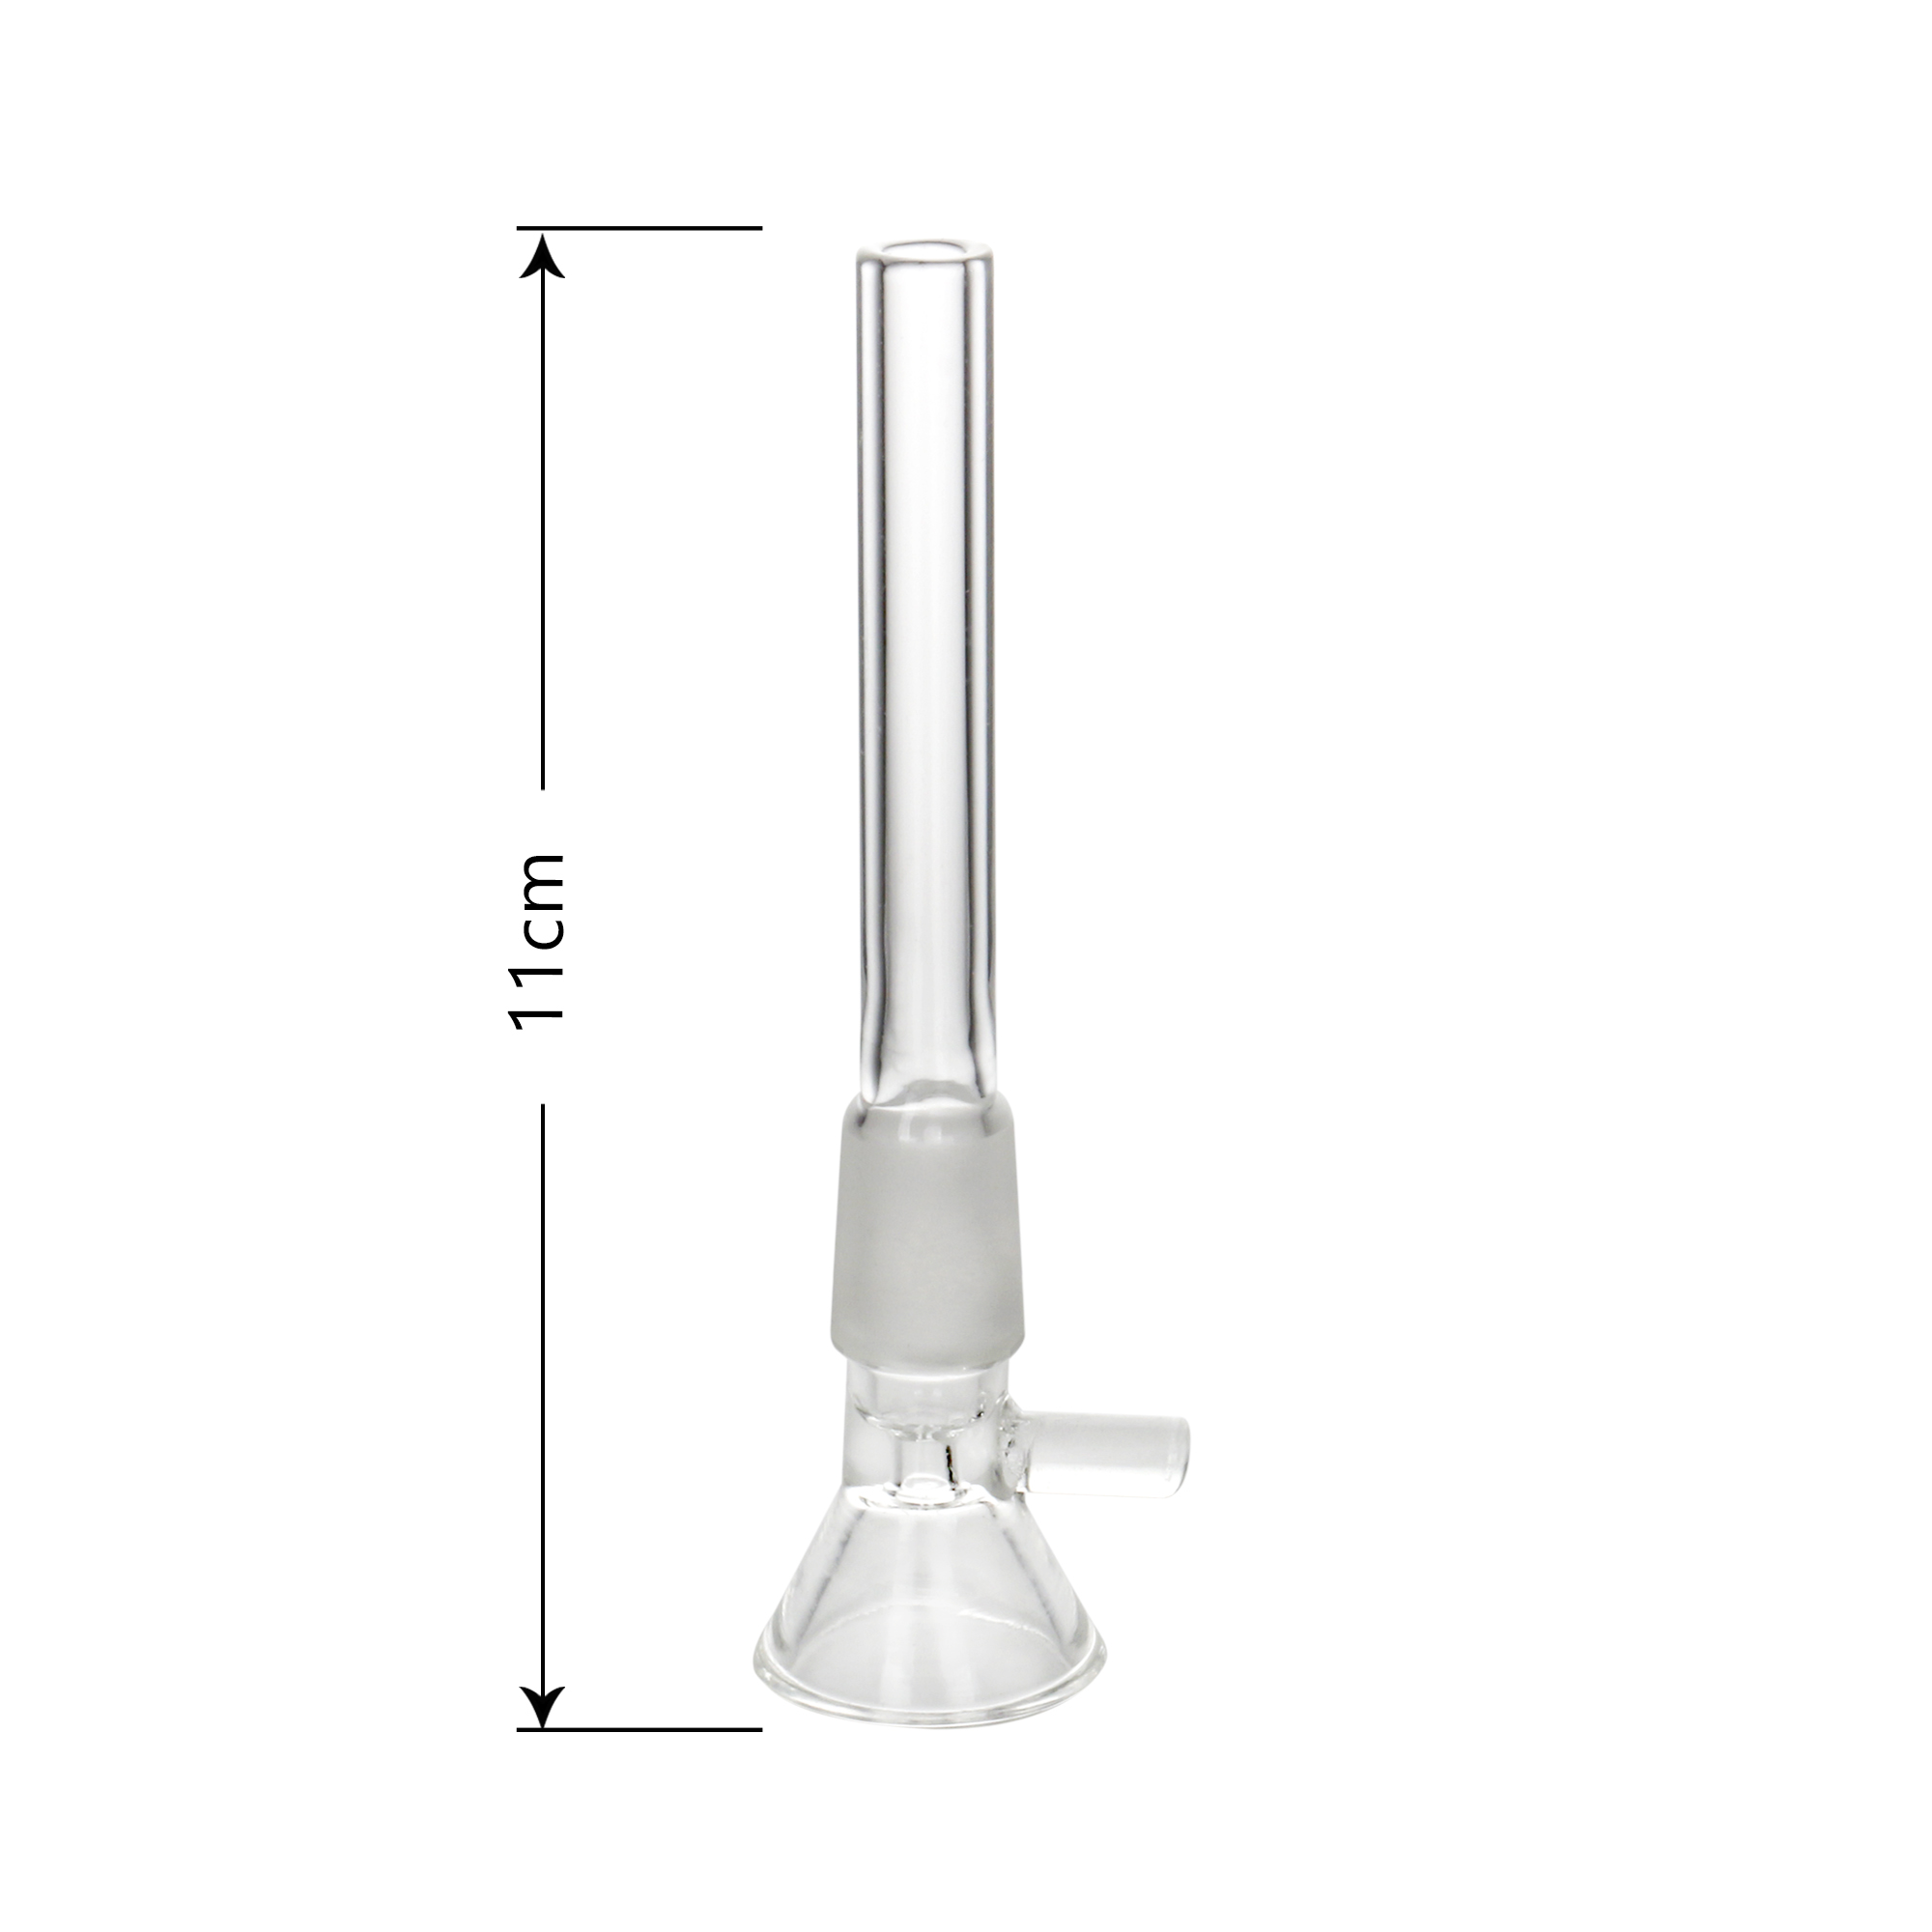 clear glass bowl and downstem in one body